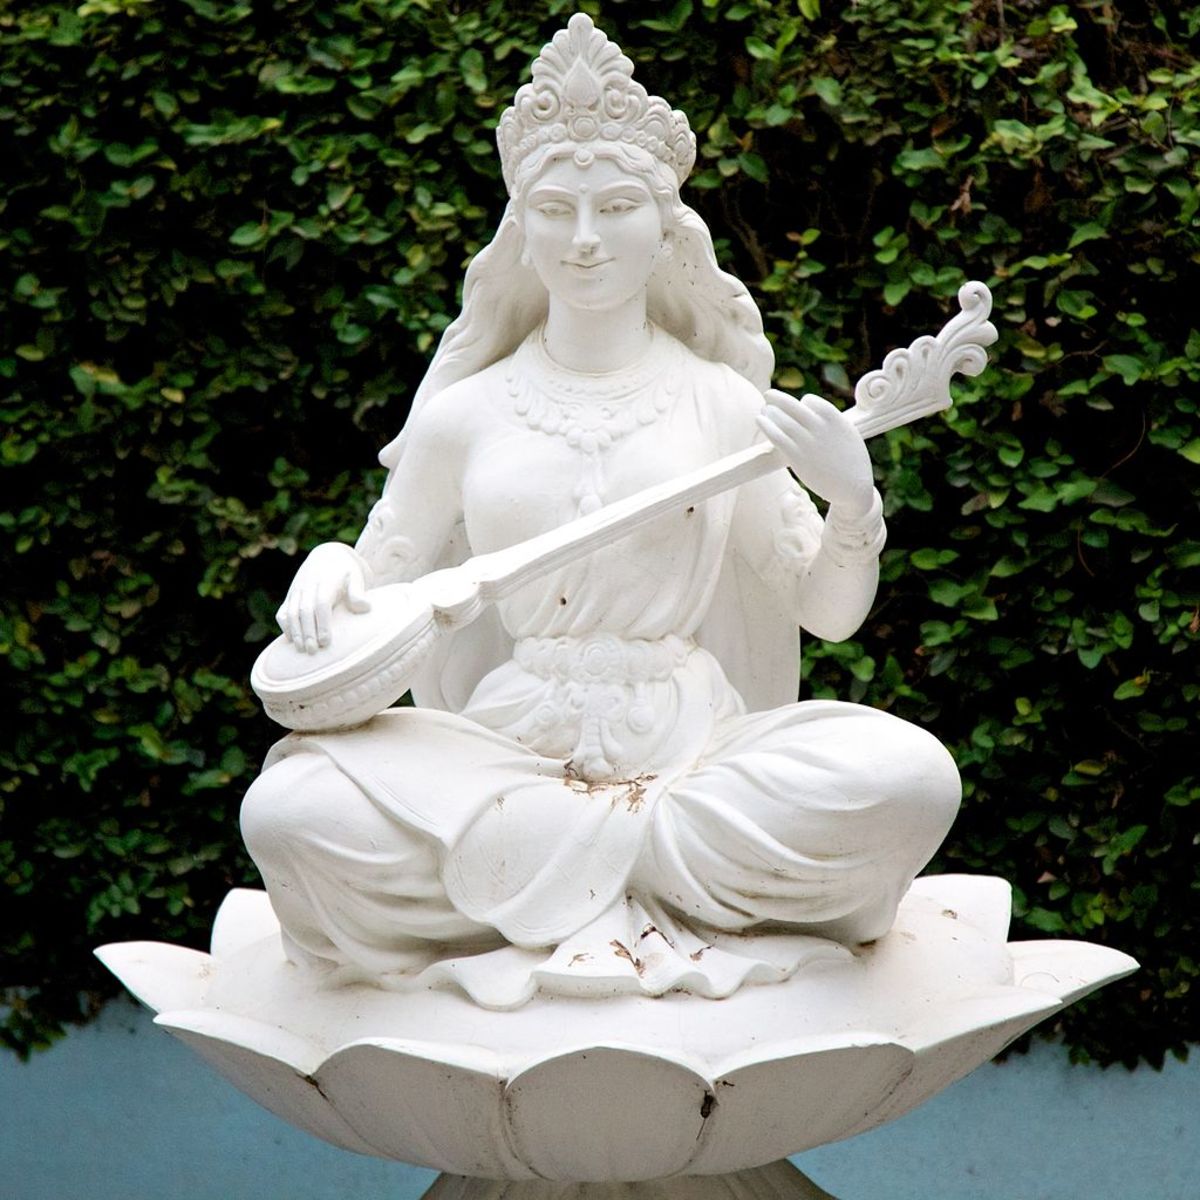 Saraswati: The Hindu Divine Muse of Creativity is very much like the image of the damsel portrayed by Coleridge, especially with her "Veena", a musical instrument similar to the dulcimer